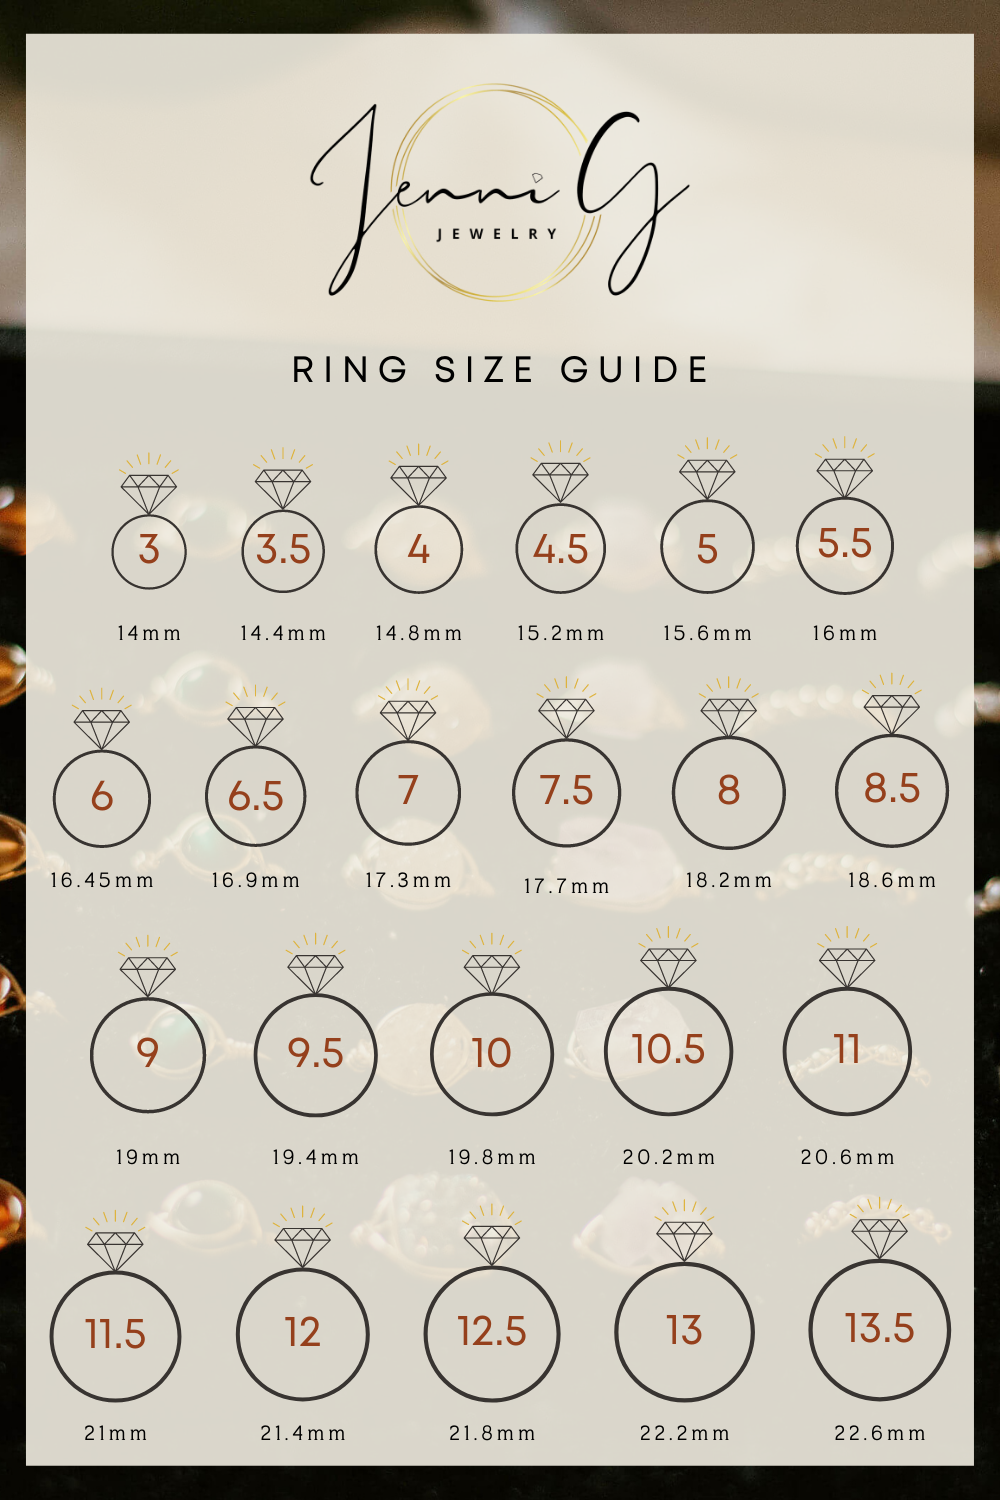 How Do You Measure Your Ring Size? | HowStuffWorks